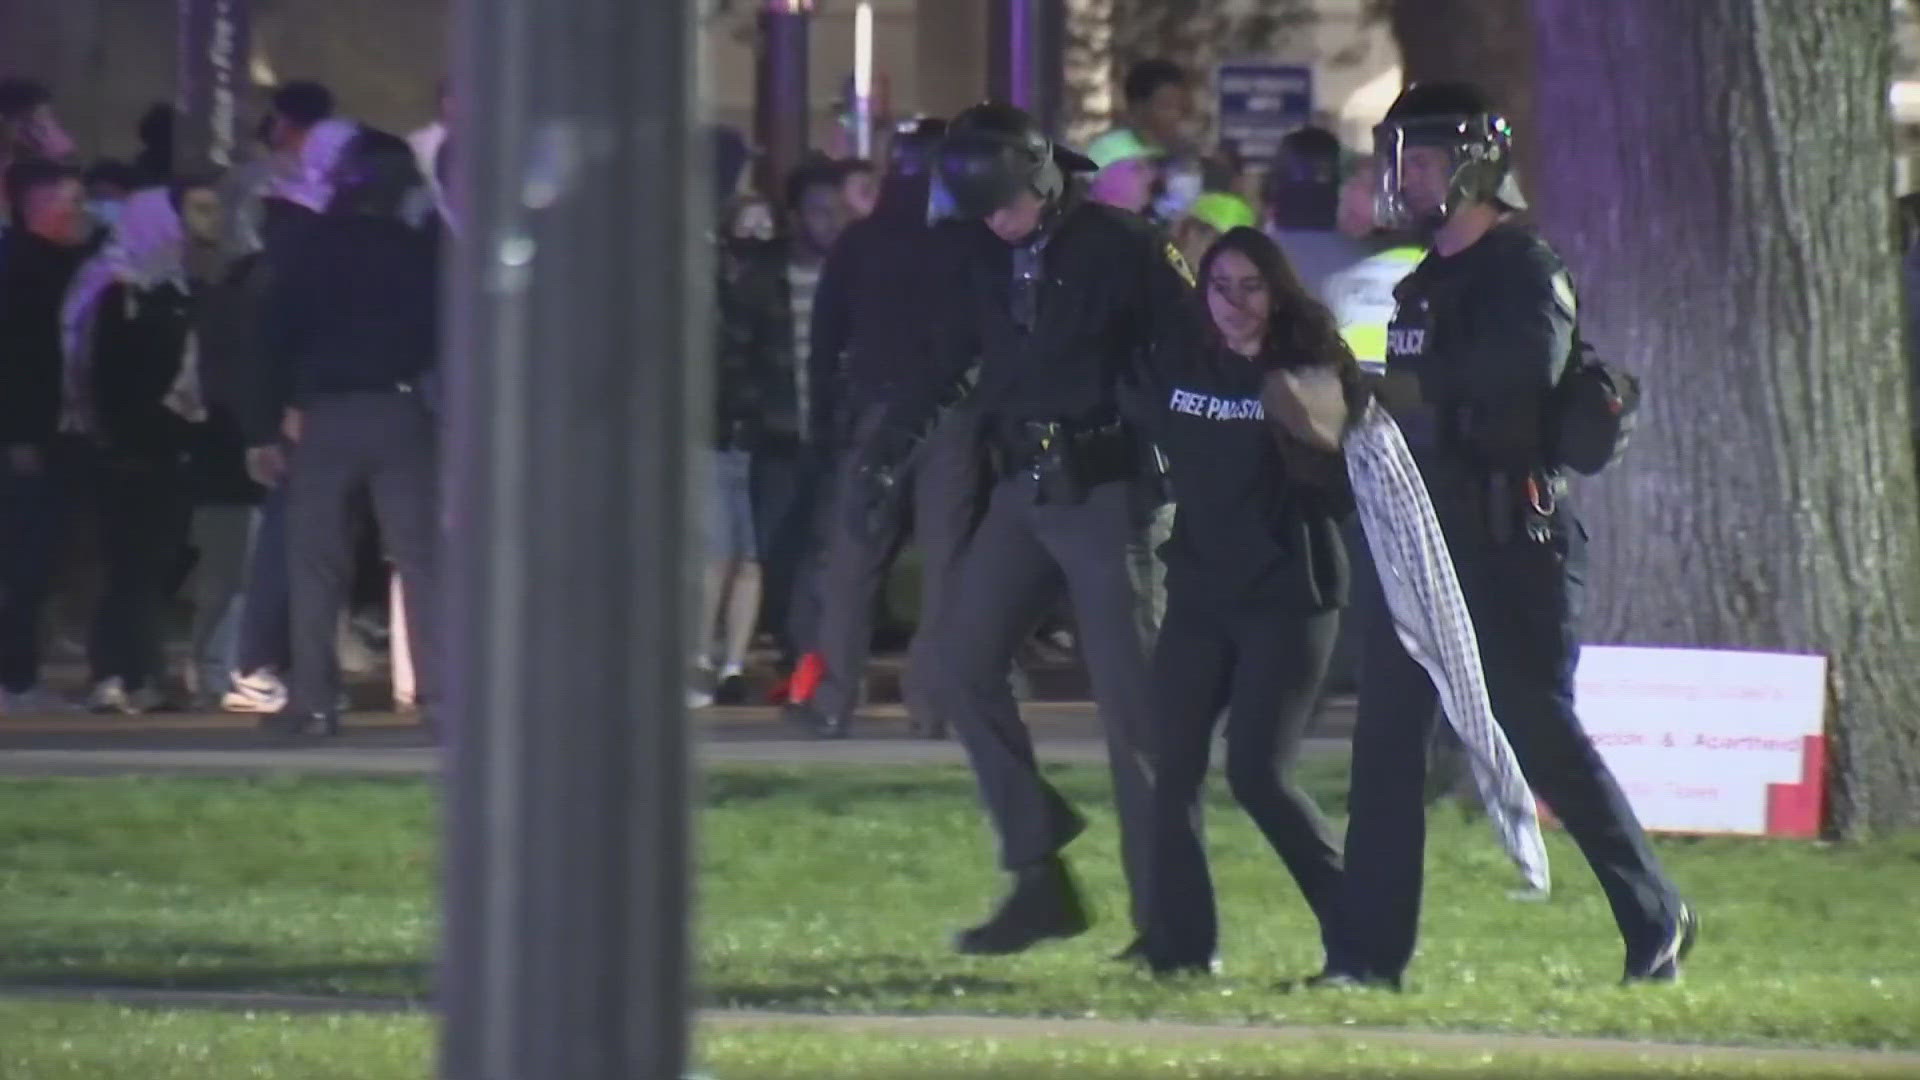 Police moved in around 10 p.m. Thursday as more than a dozen people are seen being taken into custody.